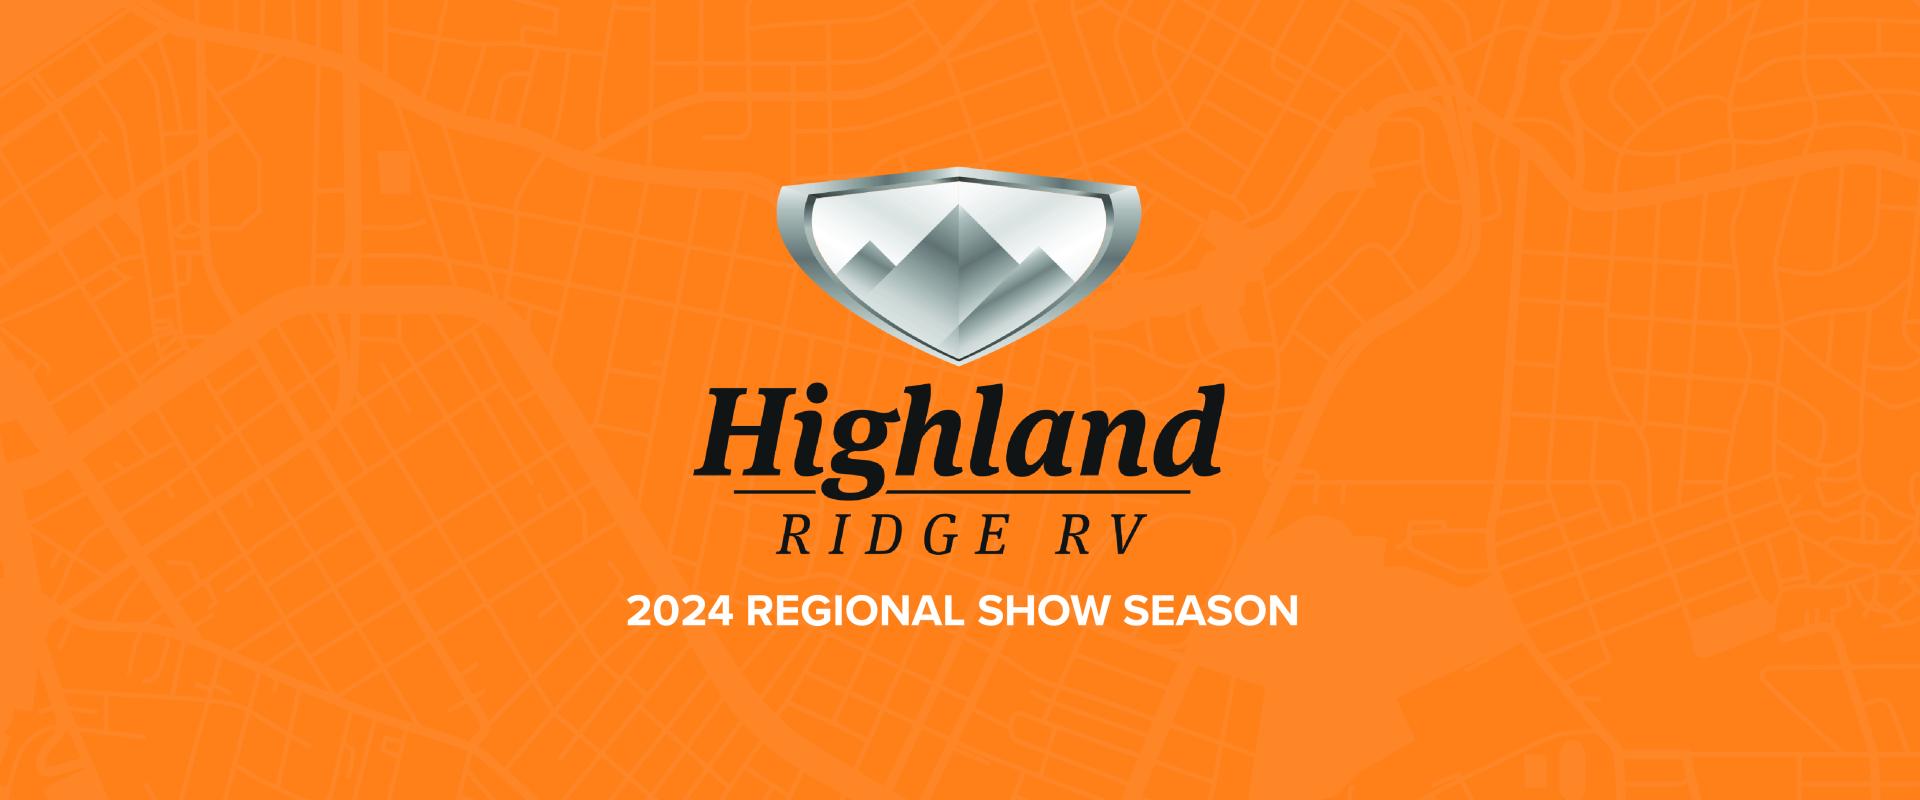 2024 Highland Ridge RV Shows and Events 